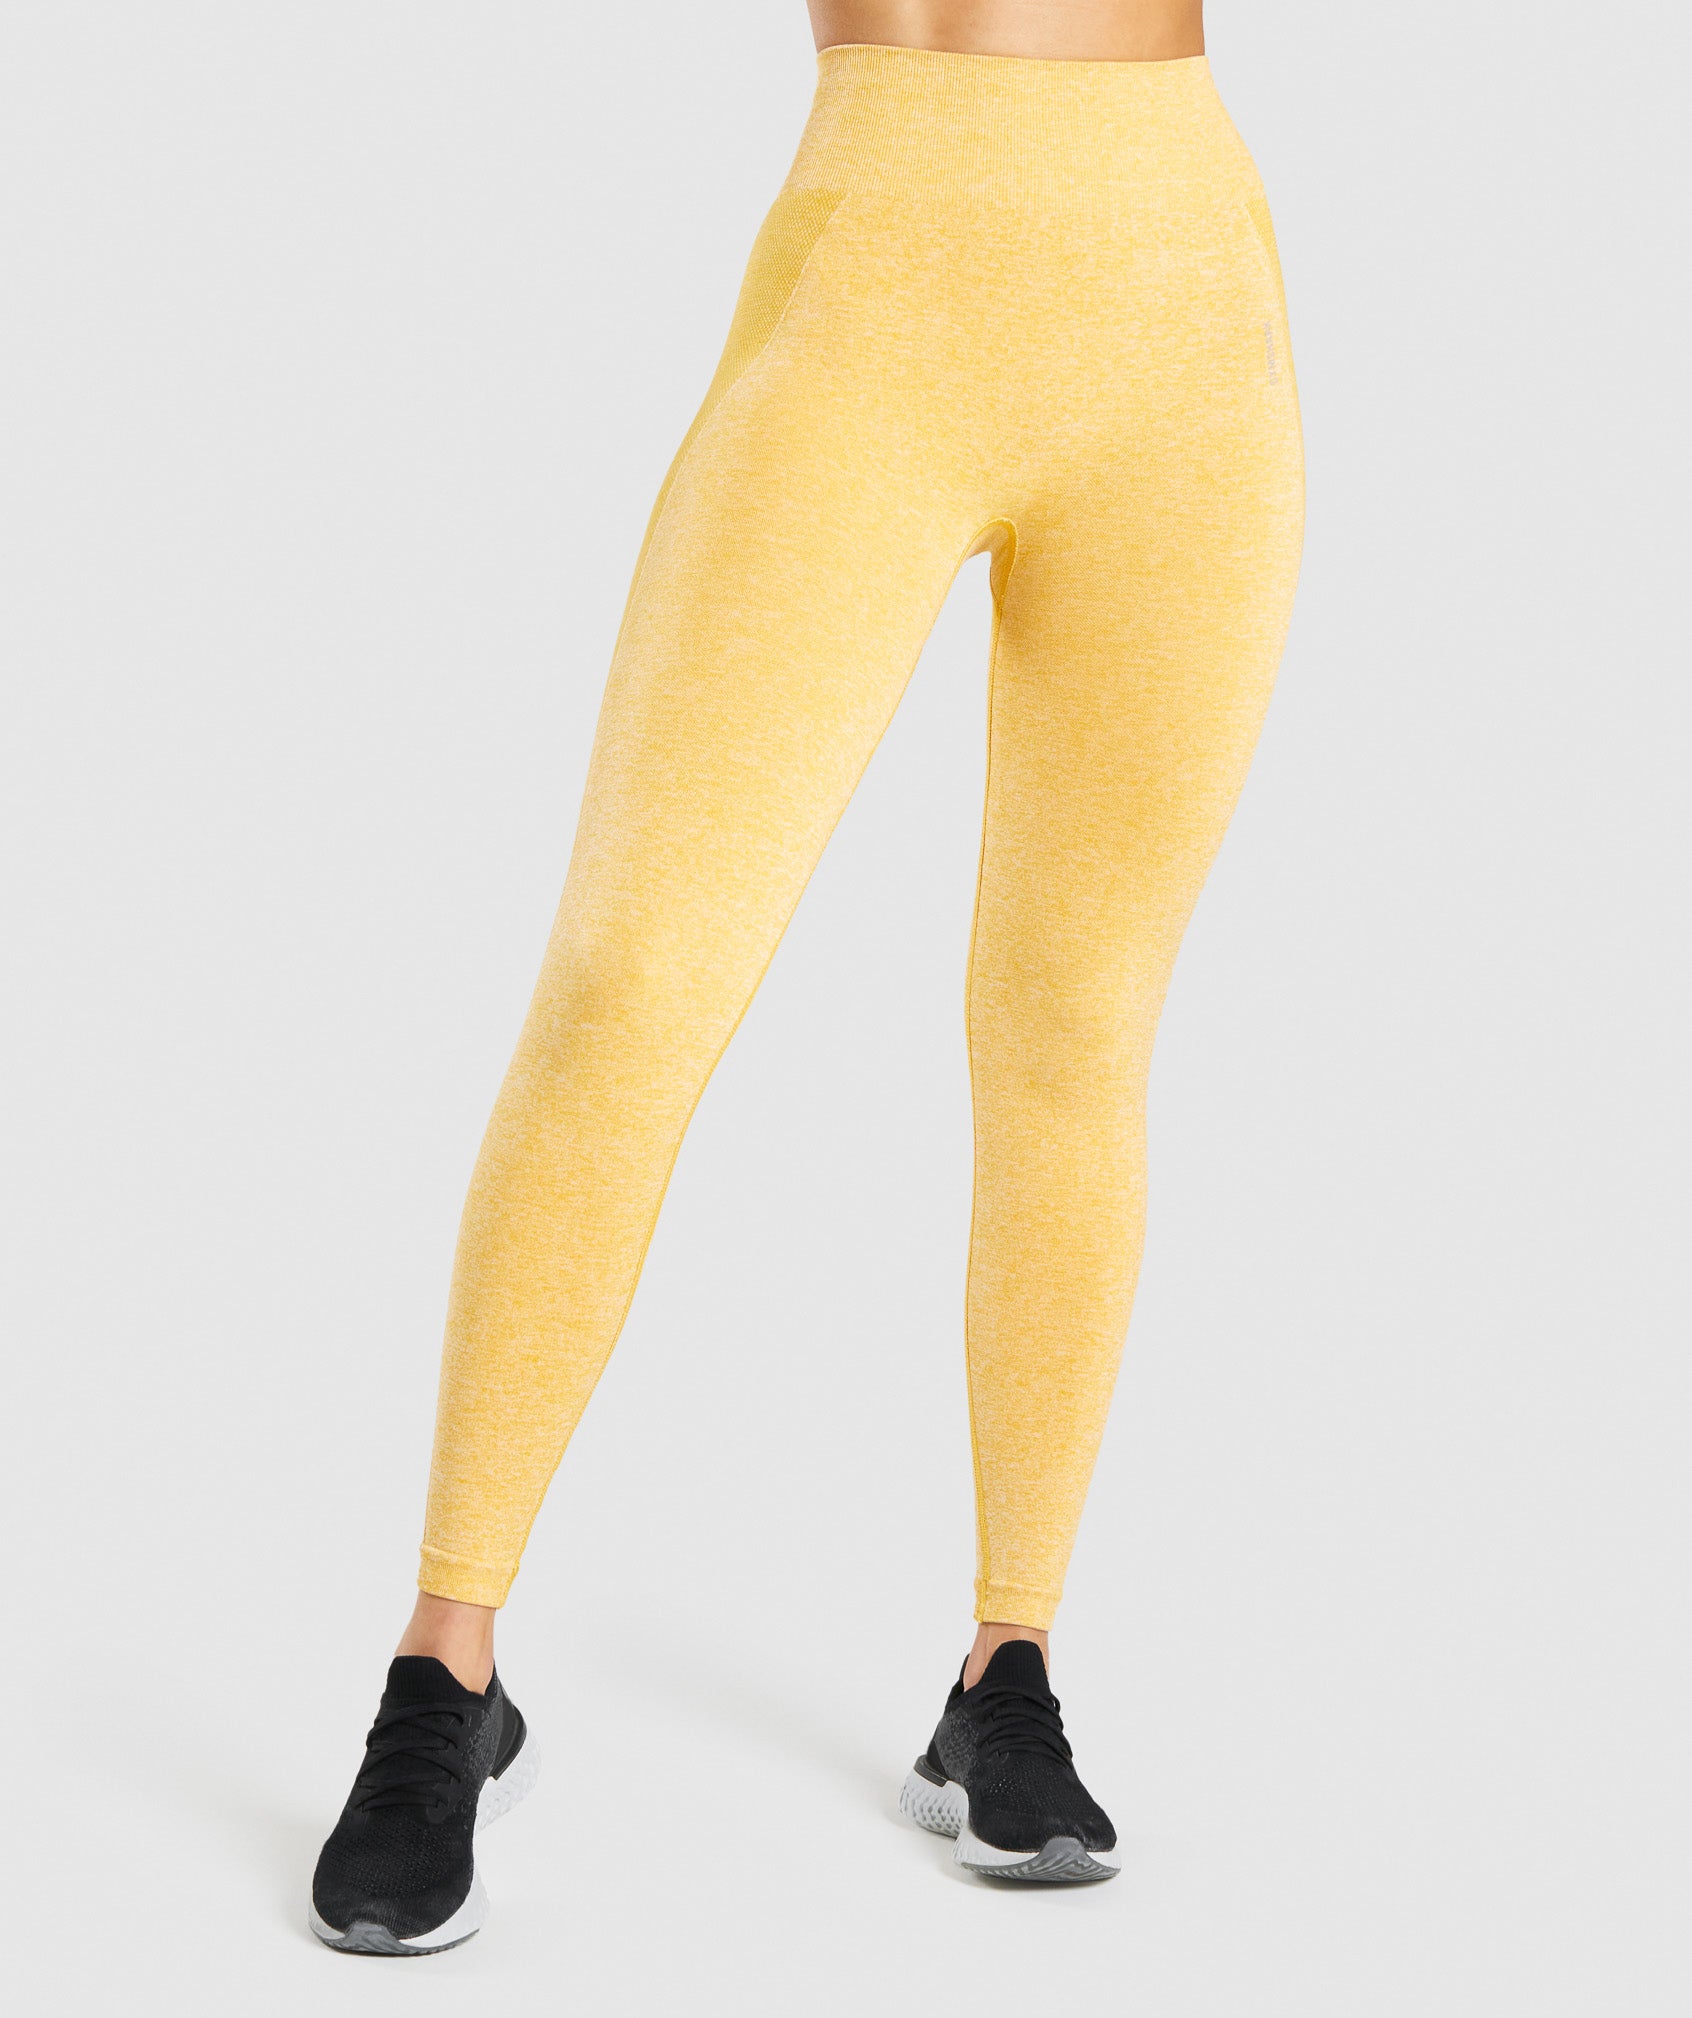 Gymshark Leggings Yellow Size XS - $35 - From Caitlyn